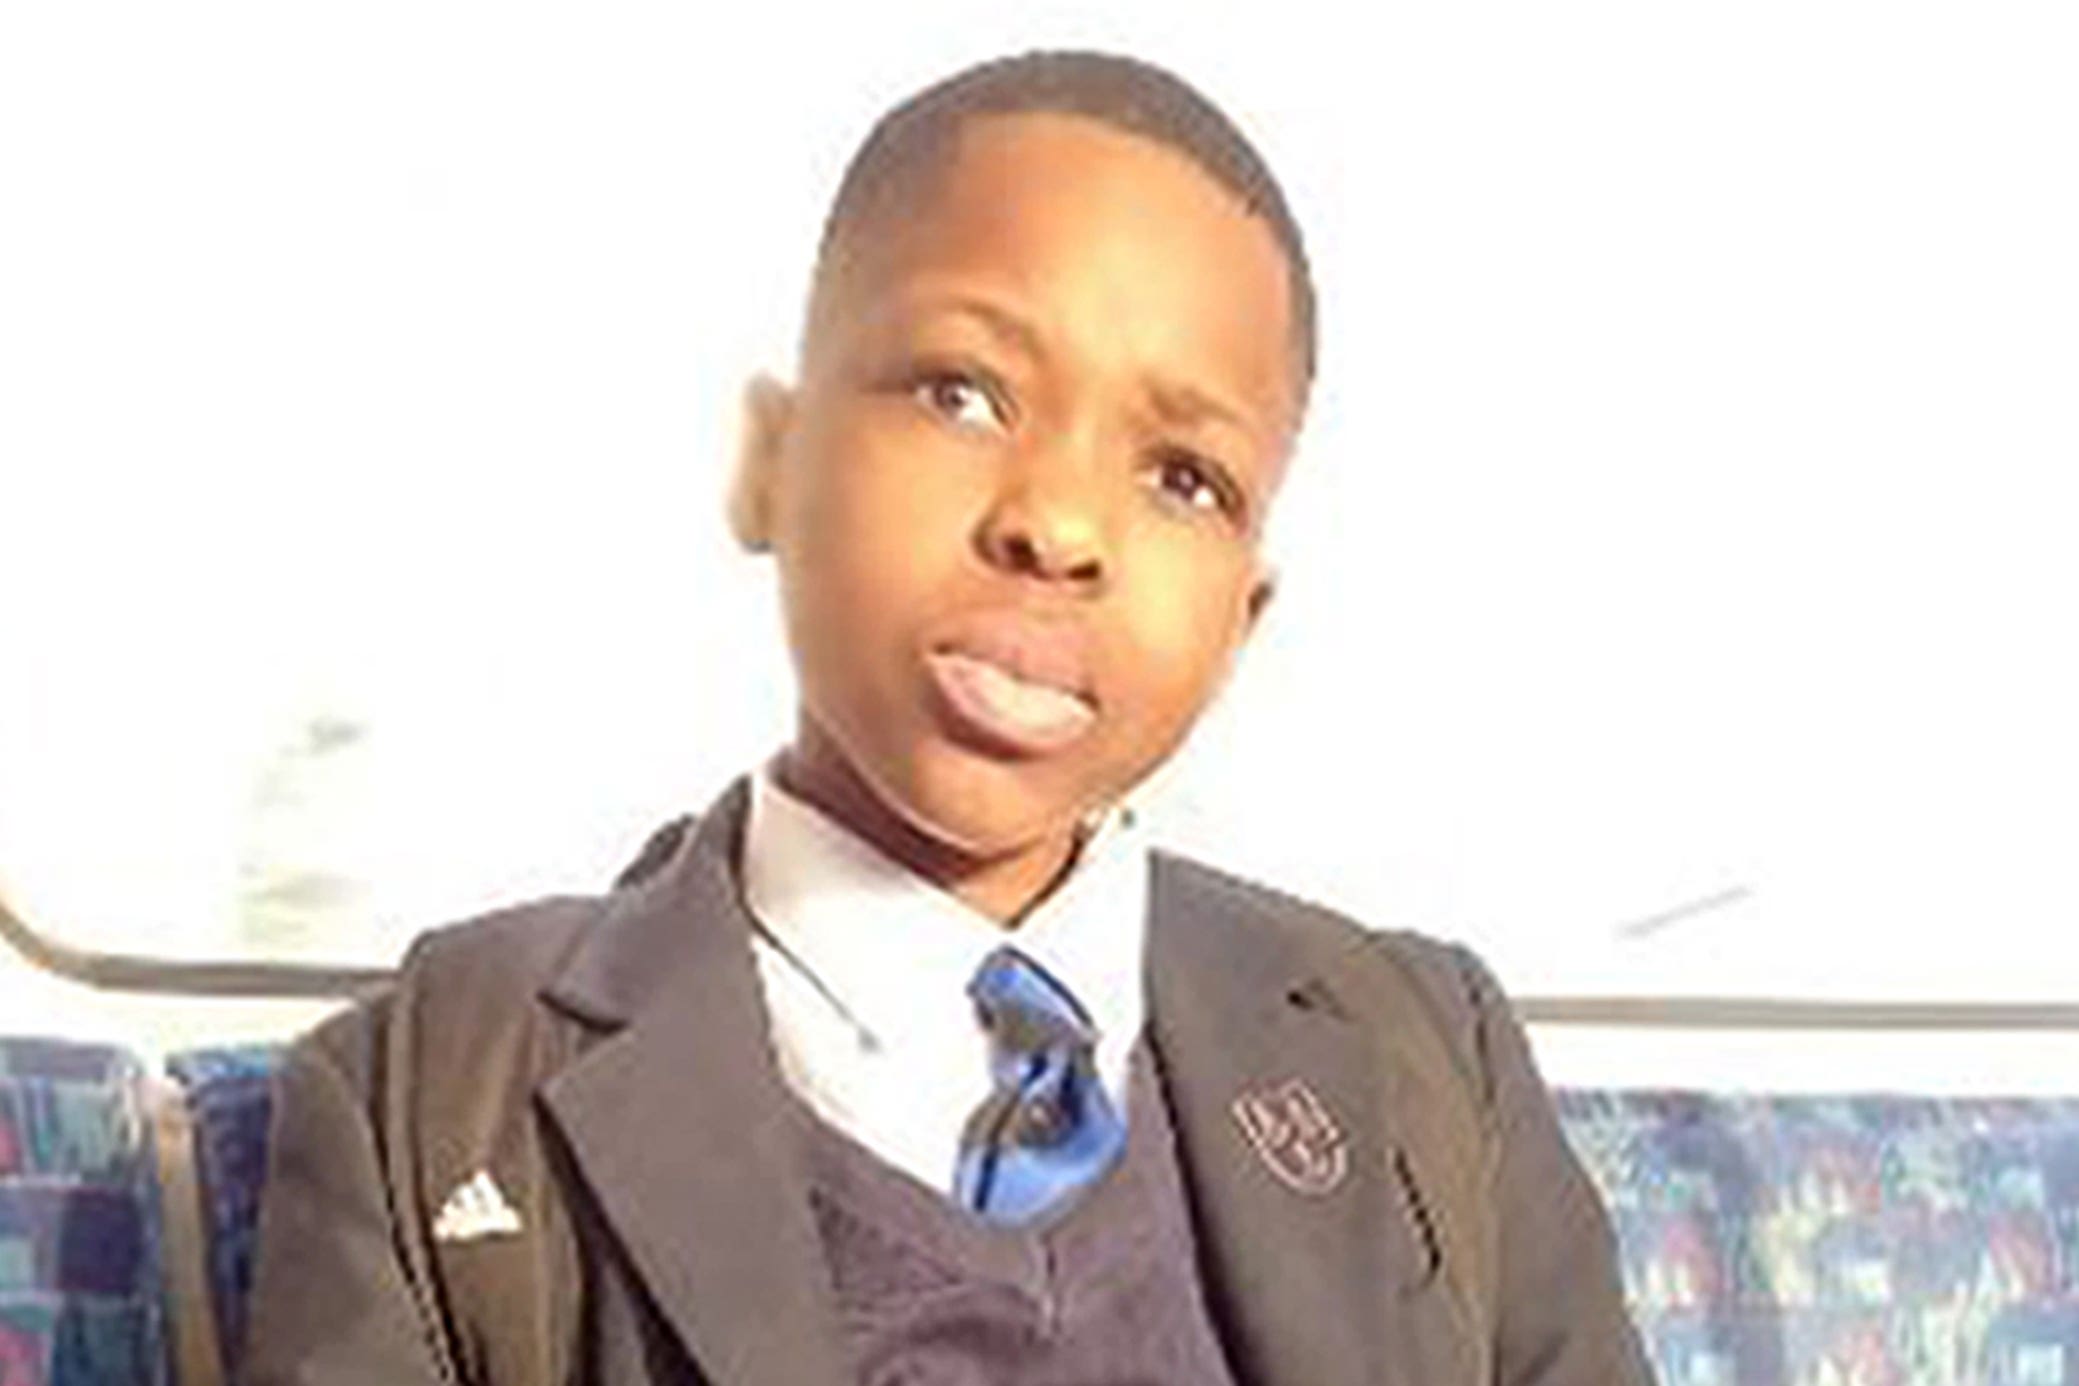 Daniel Anjorin, 14, who was killed on his way to school on Tuesday